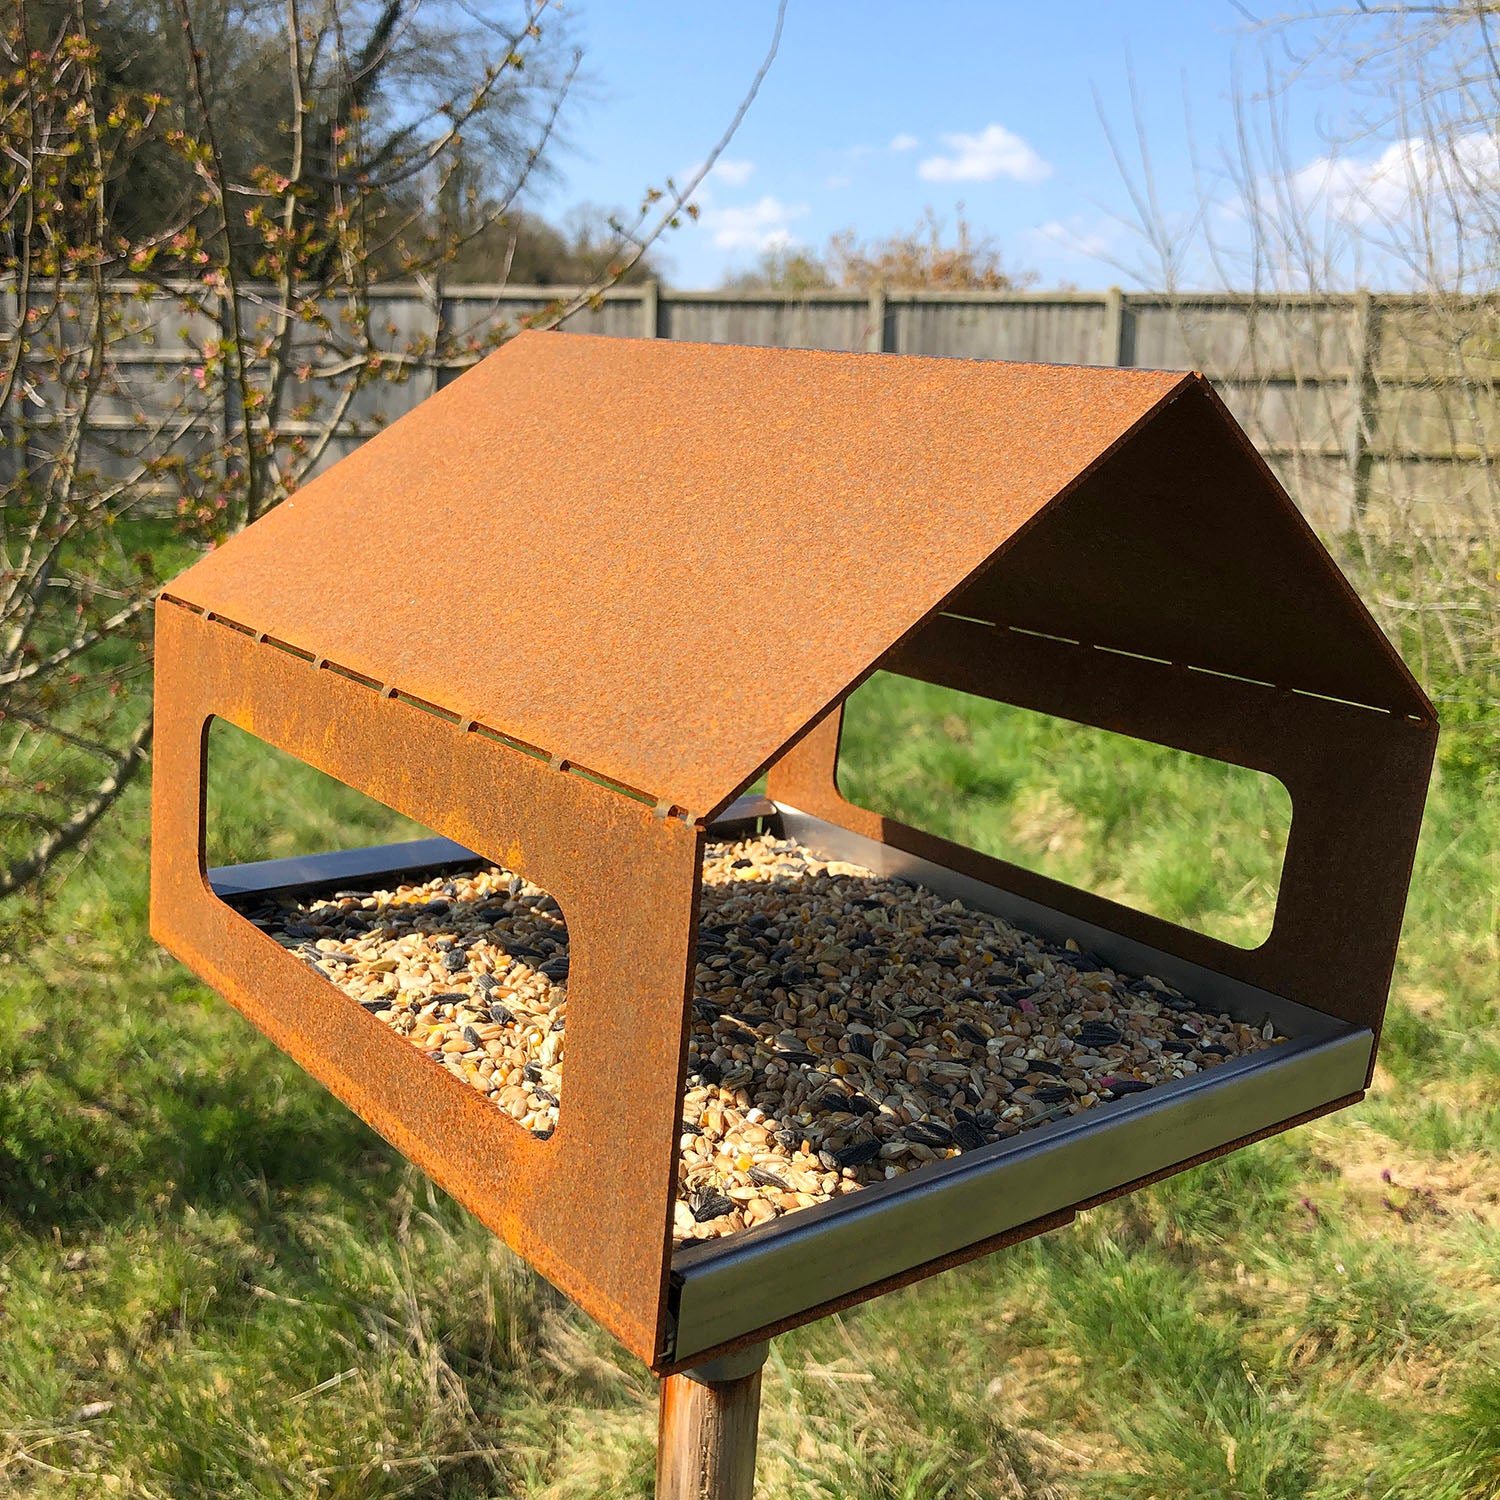 Rustic Steel Garden Bird Feeder with Removable Tray & Mounting Pole